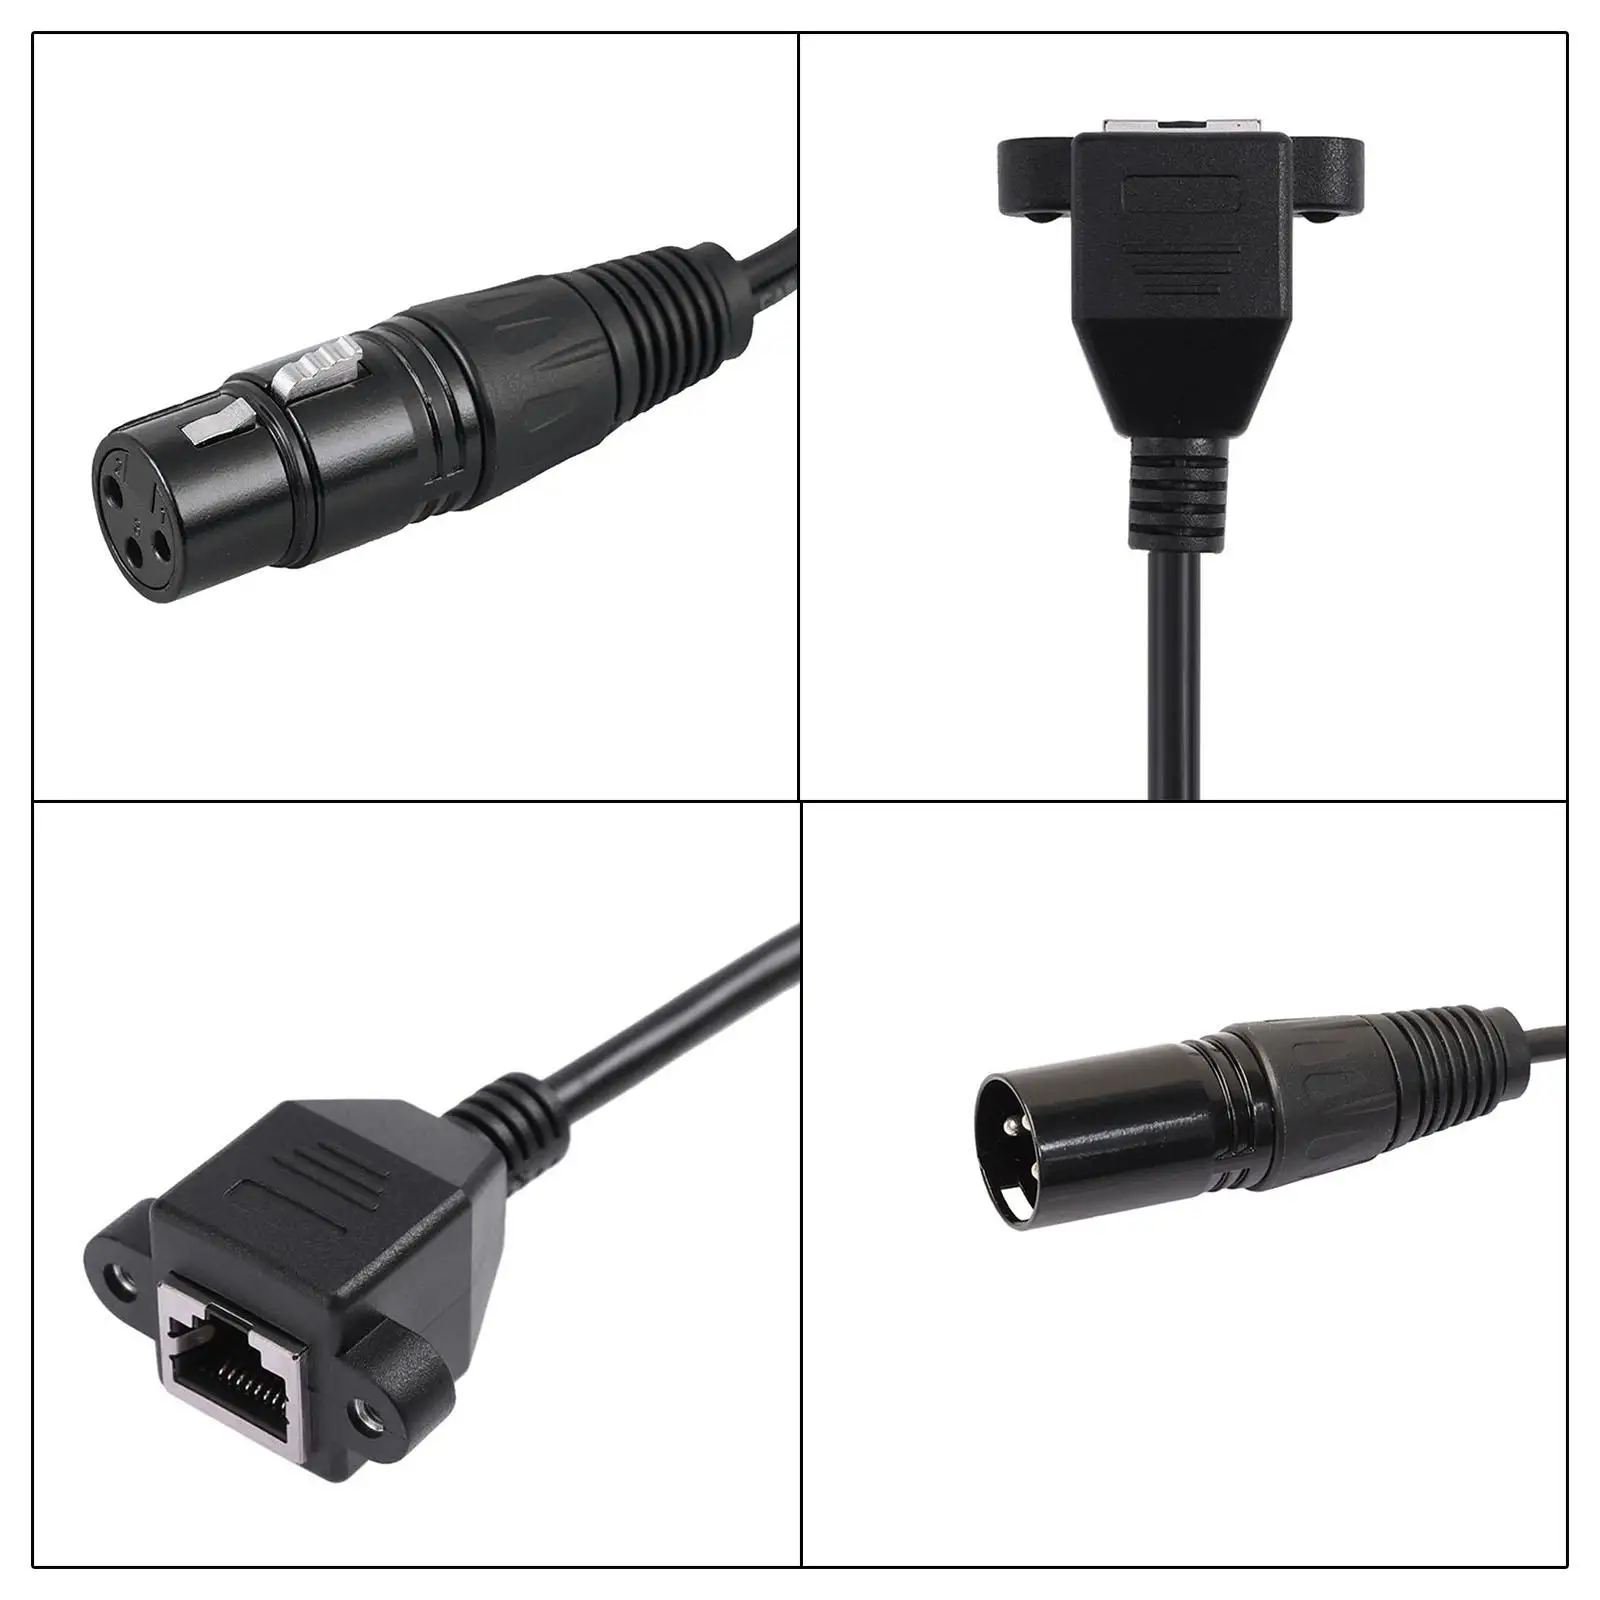 1 Pair 3 Pin XLR to Female Male Adapter Cables, Converter Cable for Dmx Con Controller Series